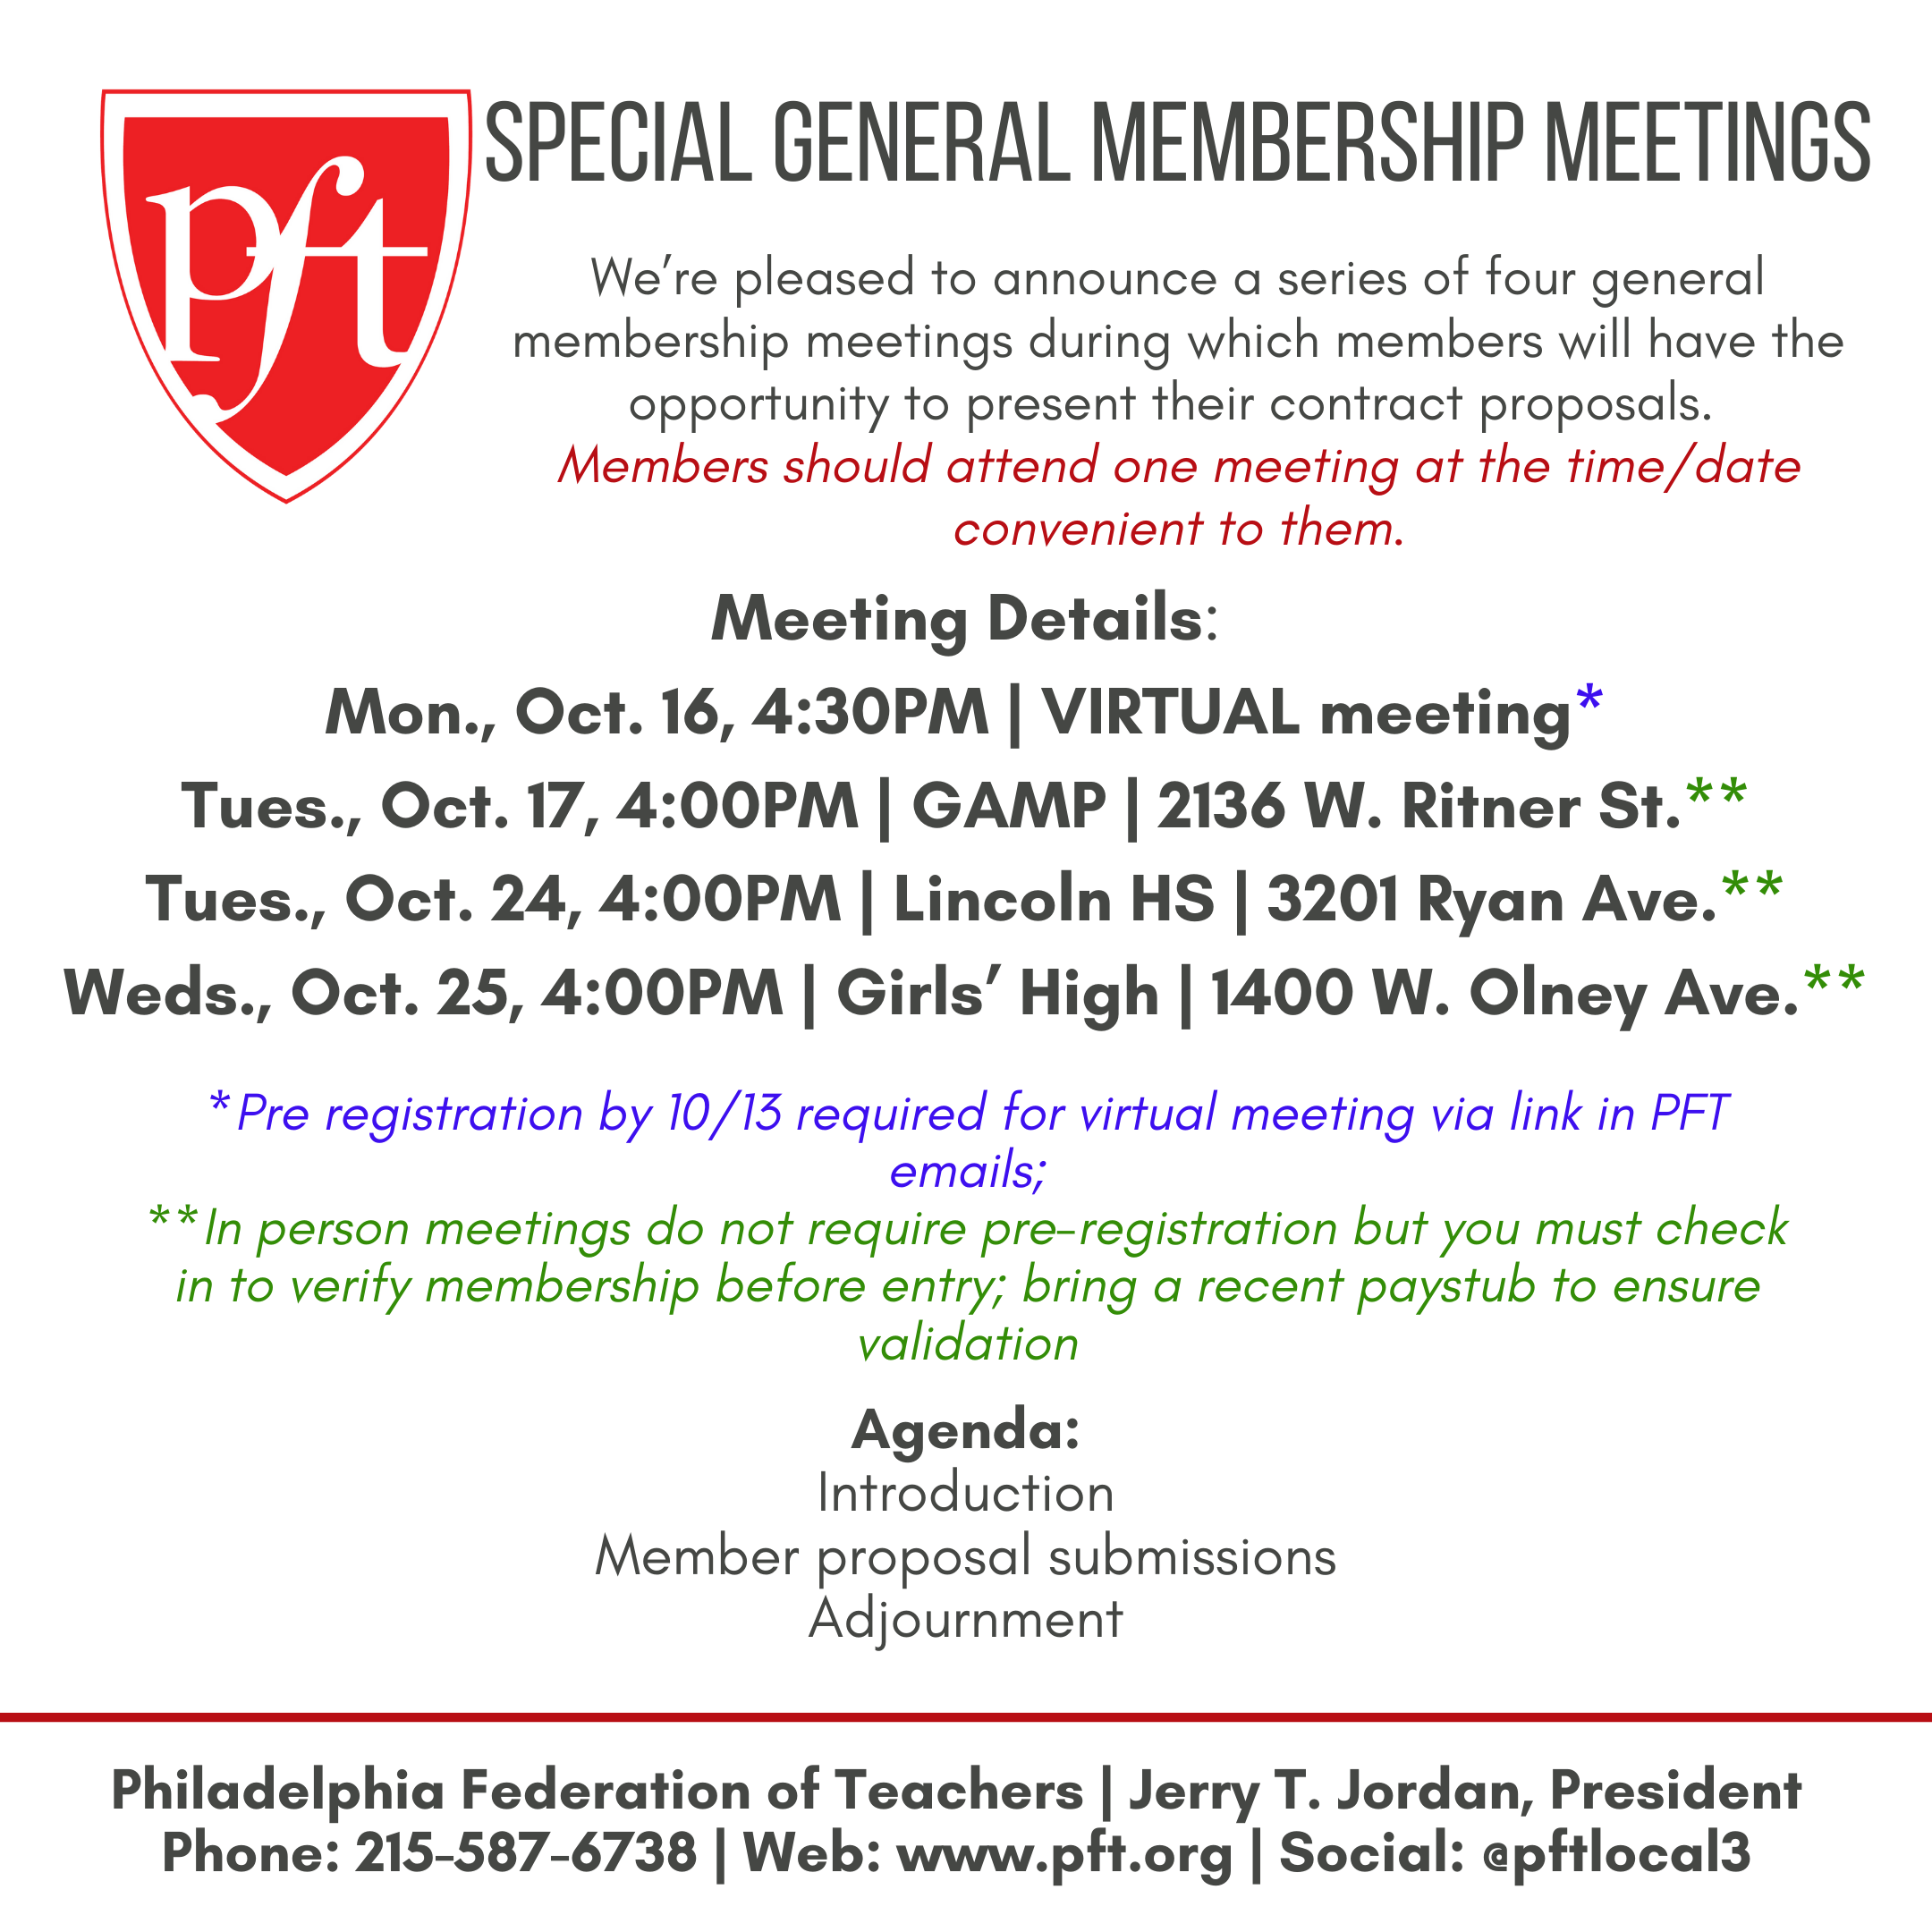 Proposals meetings dates